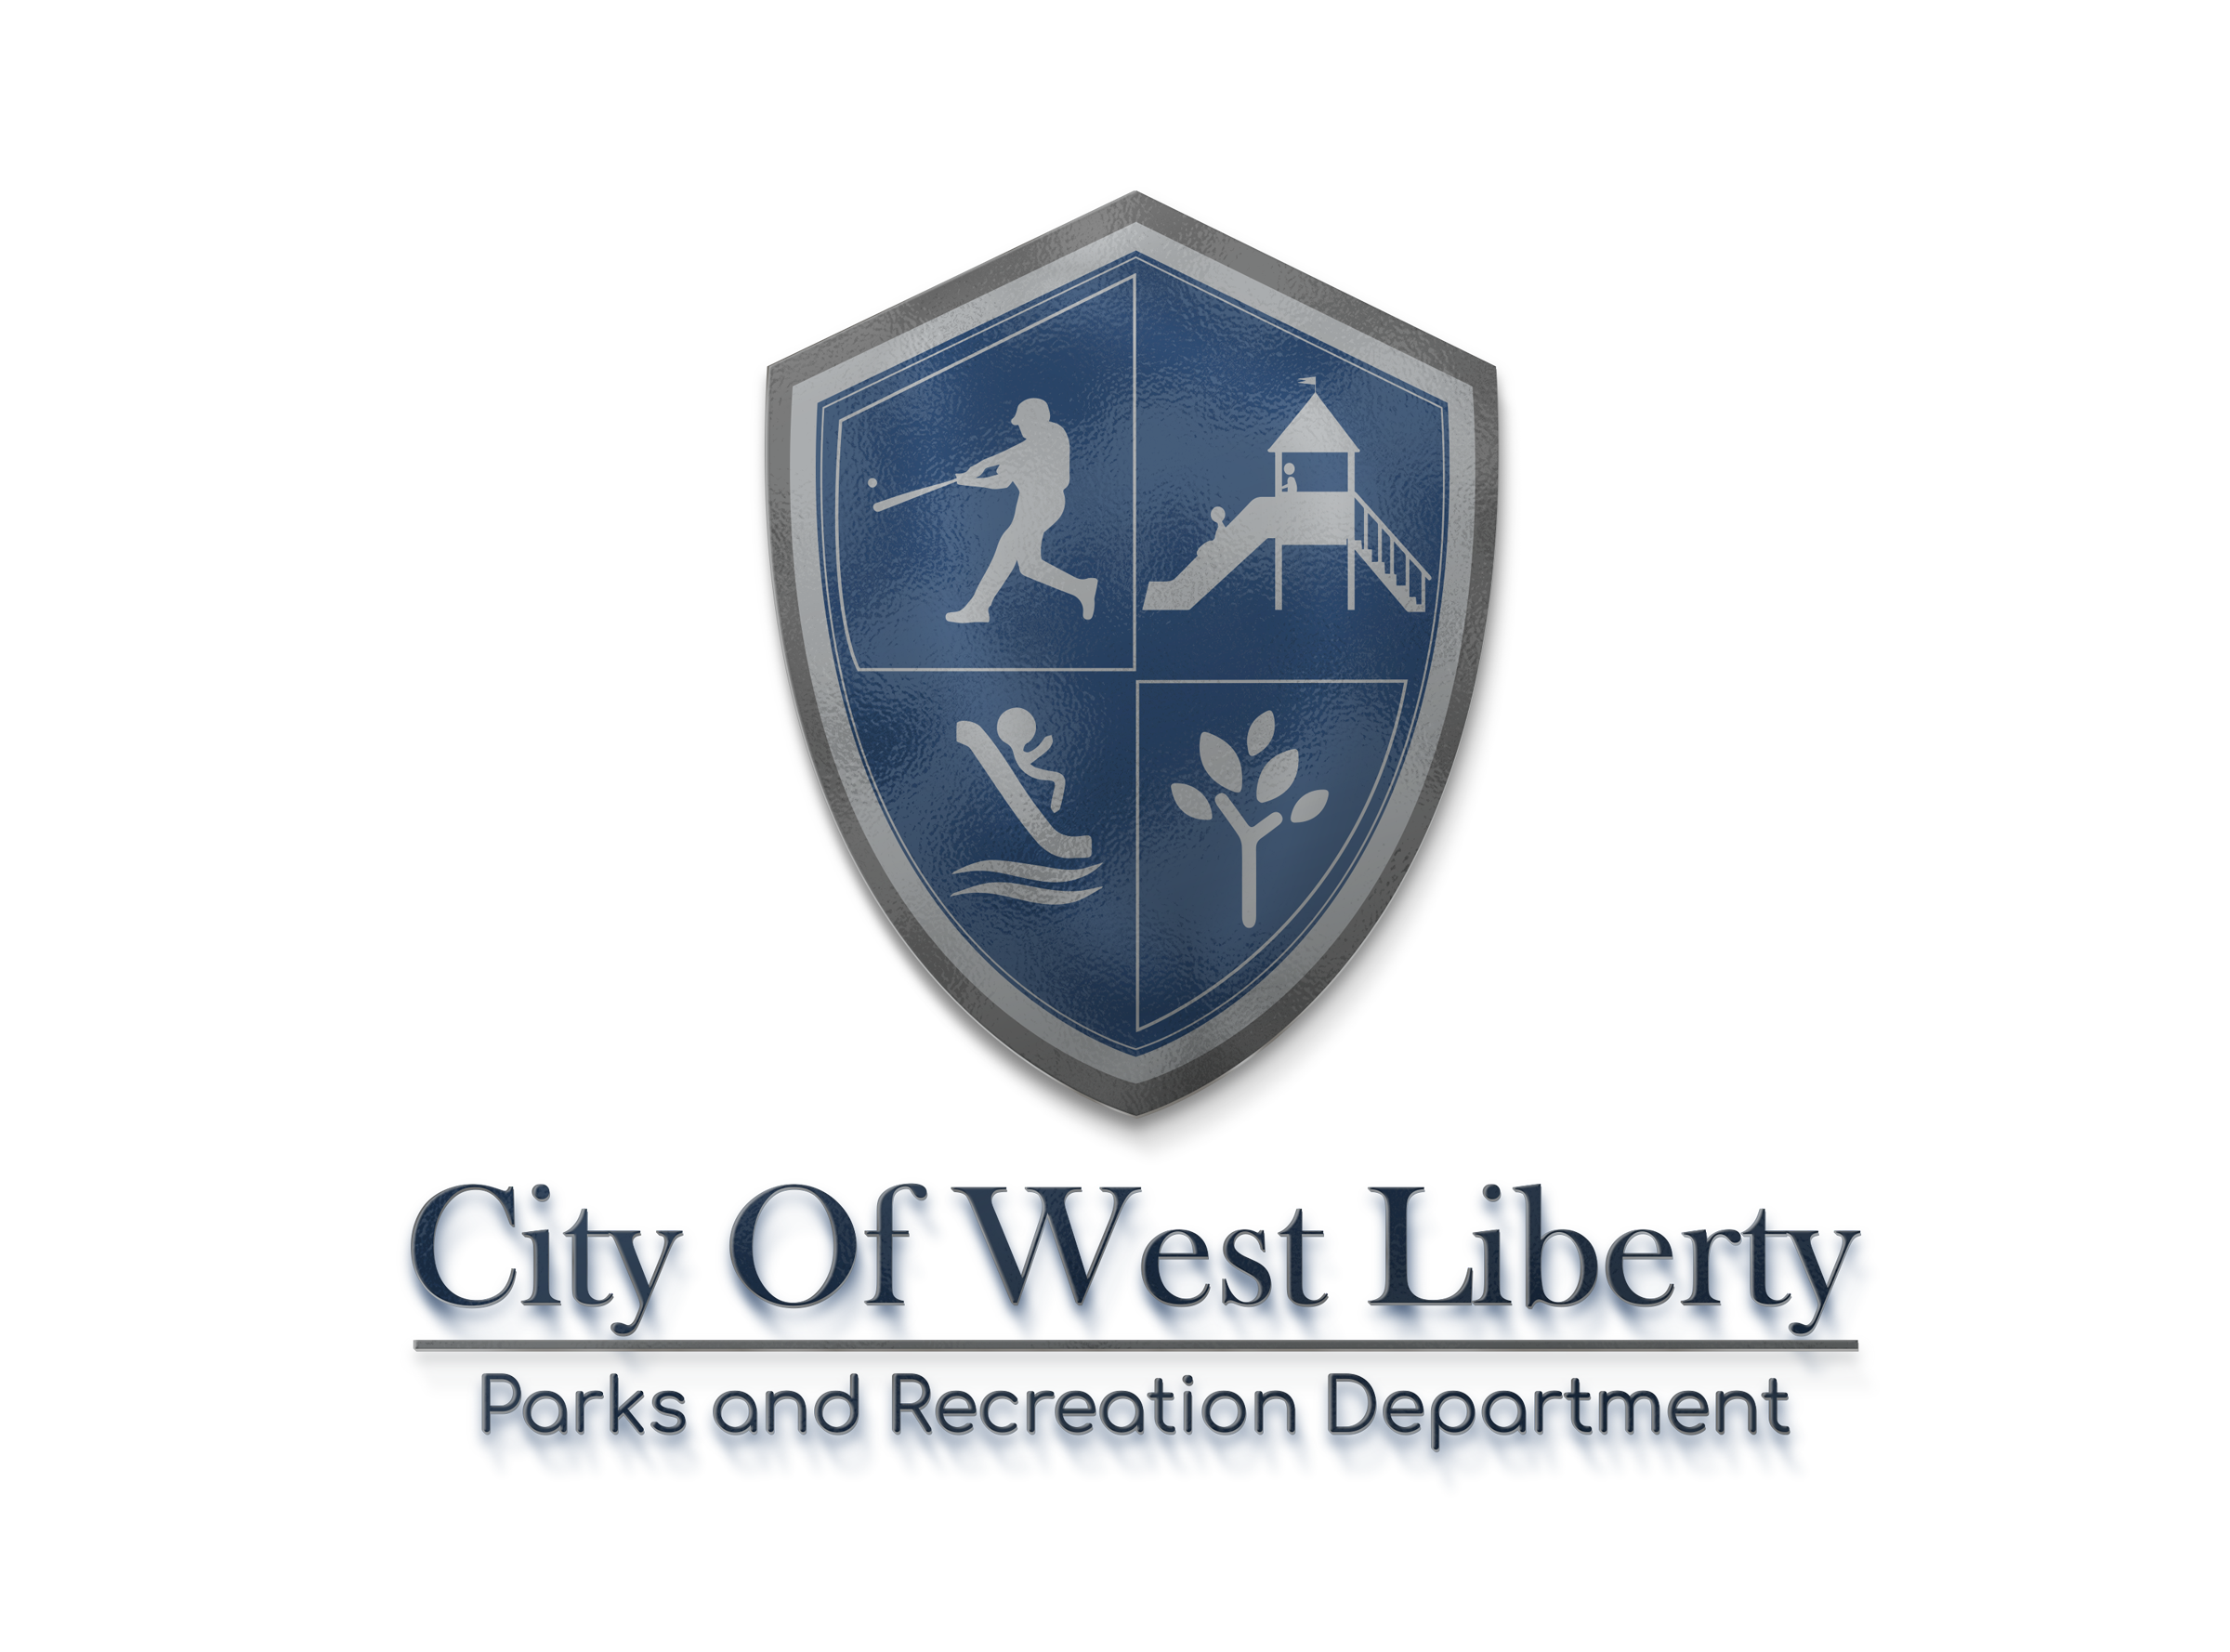 City of West Liberty